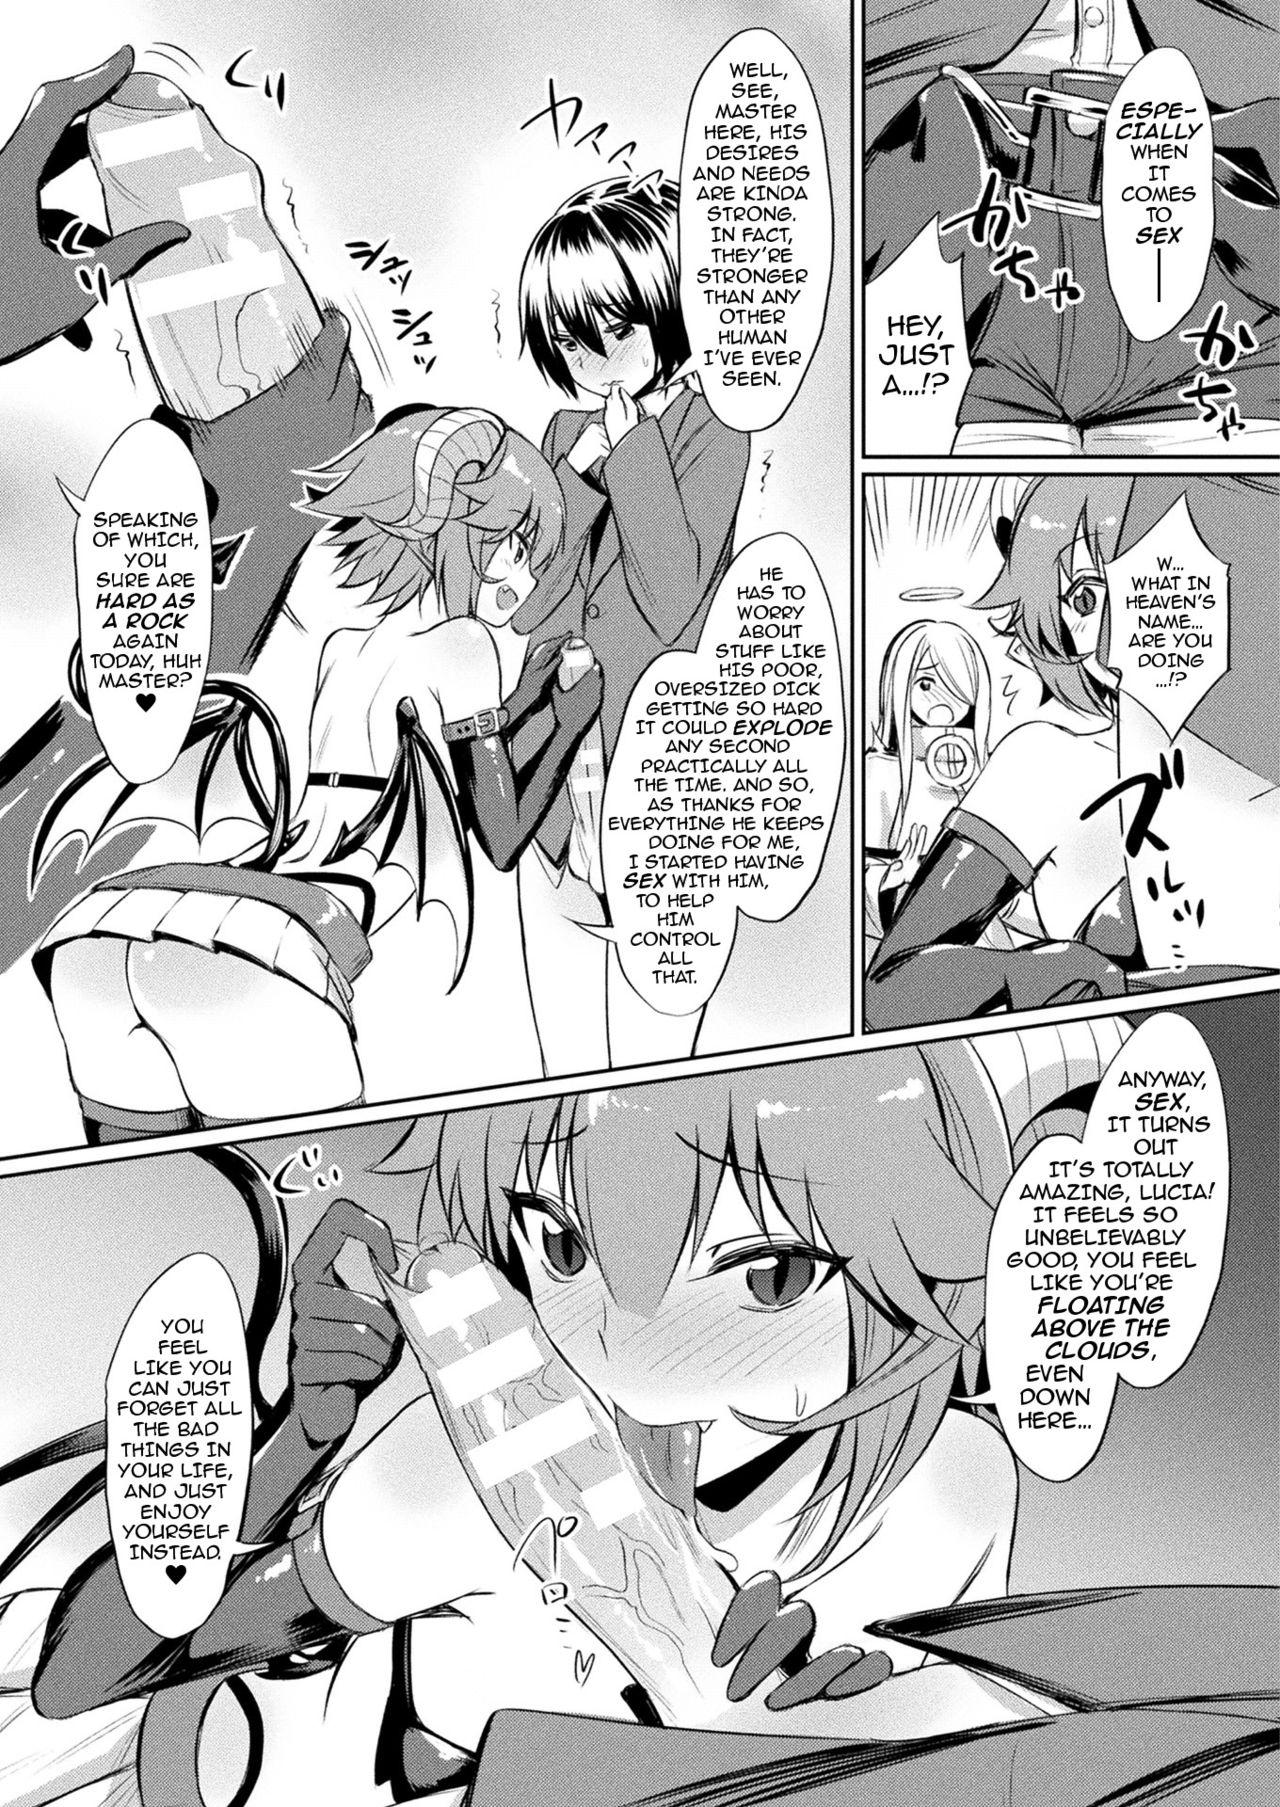 Gay Dudes Kimochii Rakuten Shiyo | Let’s Enjoy the Pleasures of FALLING FROM GRACE Together Asslick - Page 5